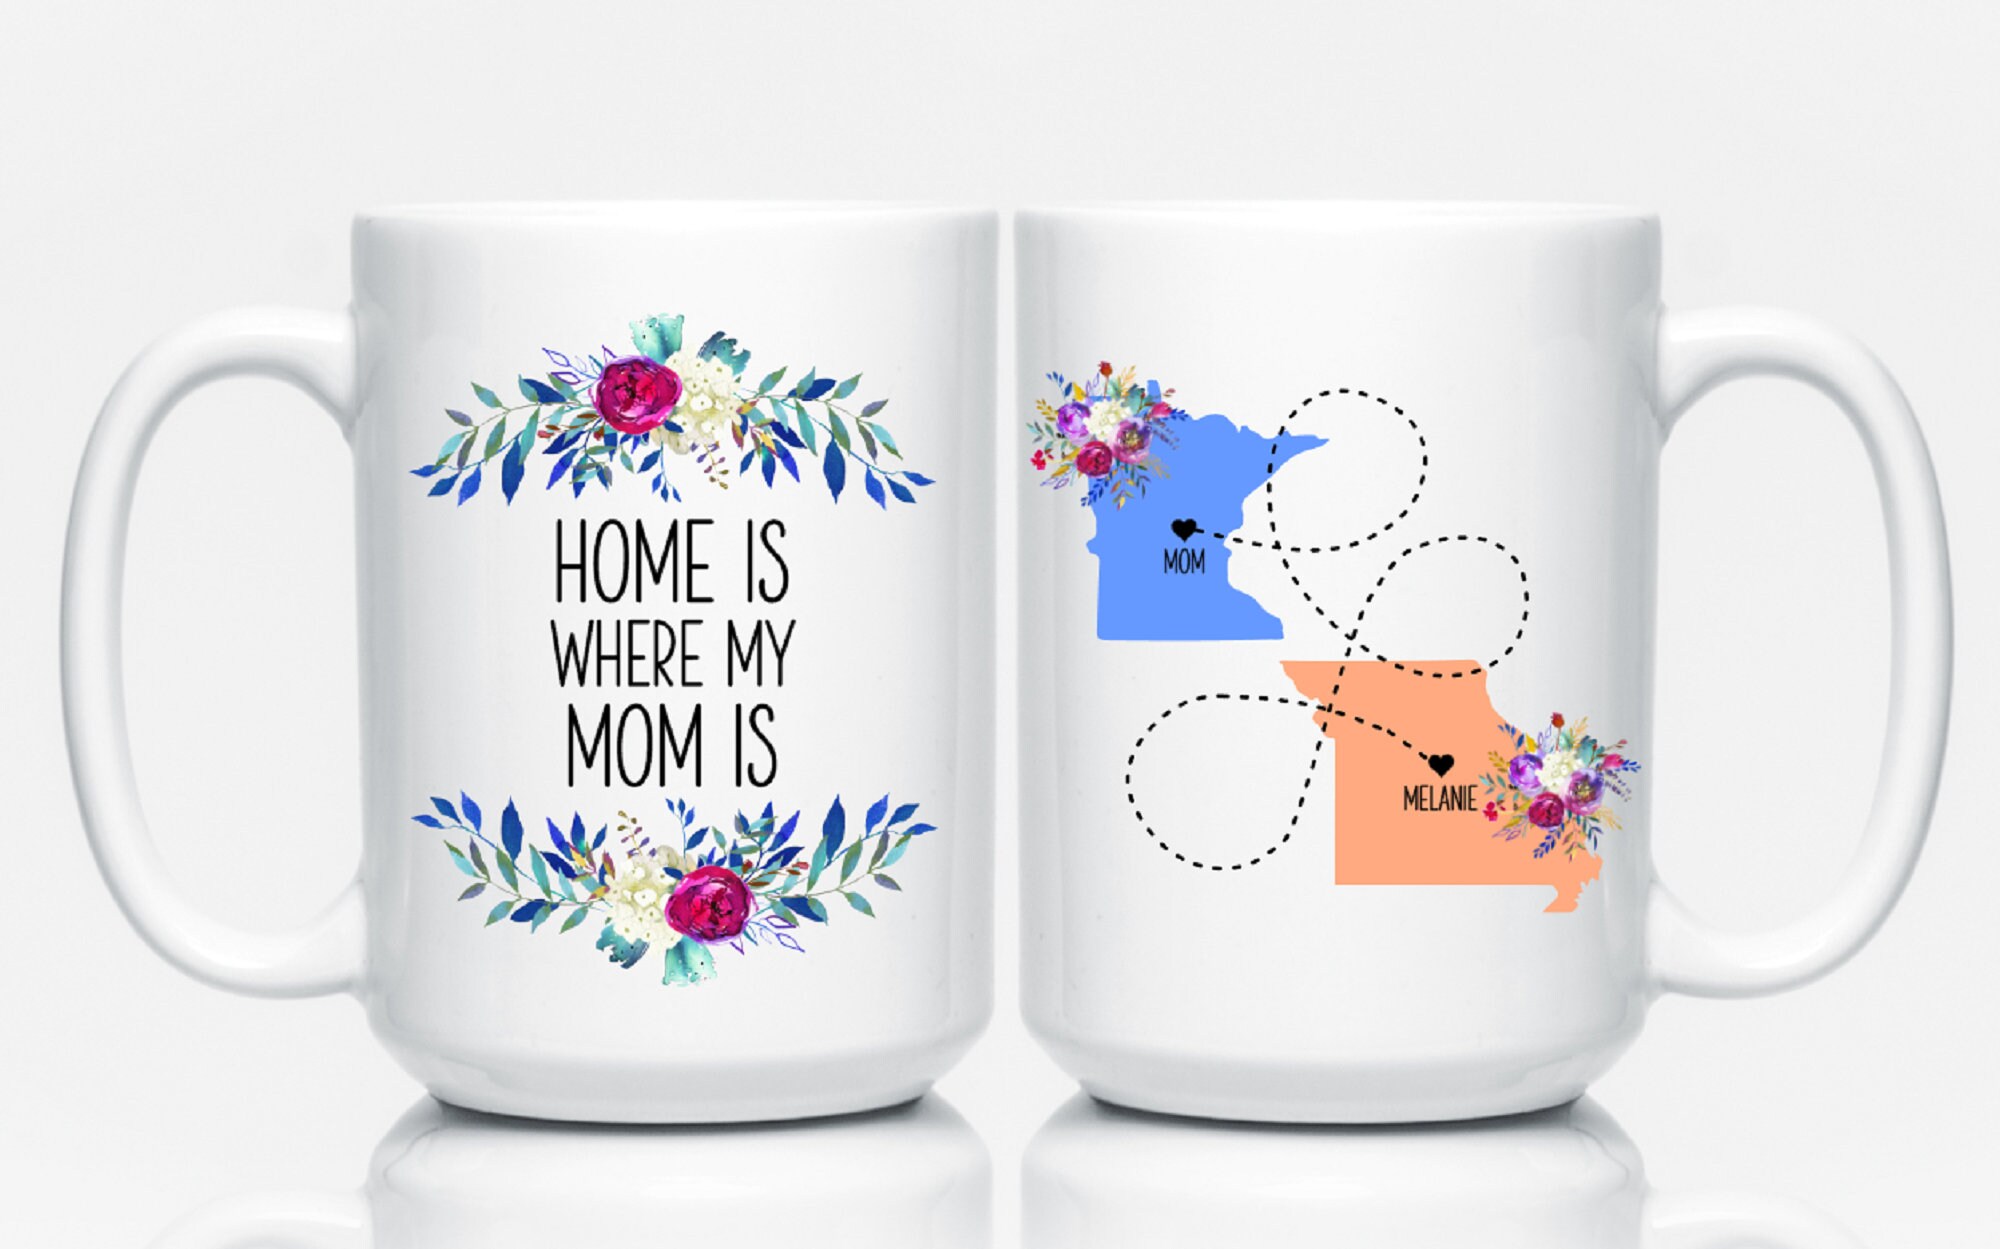 Pennsylvania Georgia Mug State to State Coffee Cup Gift Two State Mug Best Friend Mom Girlfriend Aunt Grandma Birthday Mothers Day Going Away Present Moving New Job Gifts 